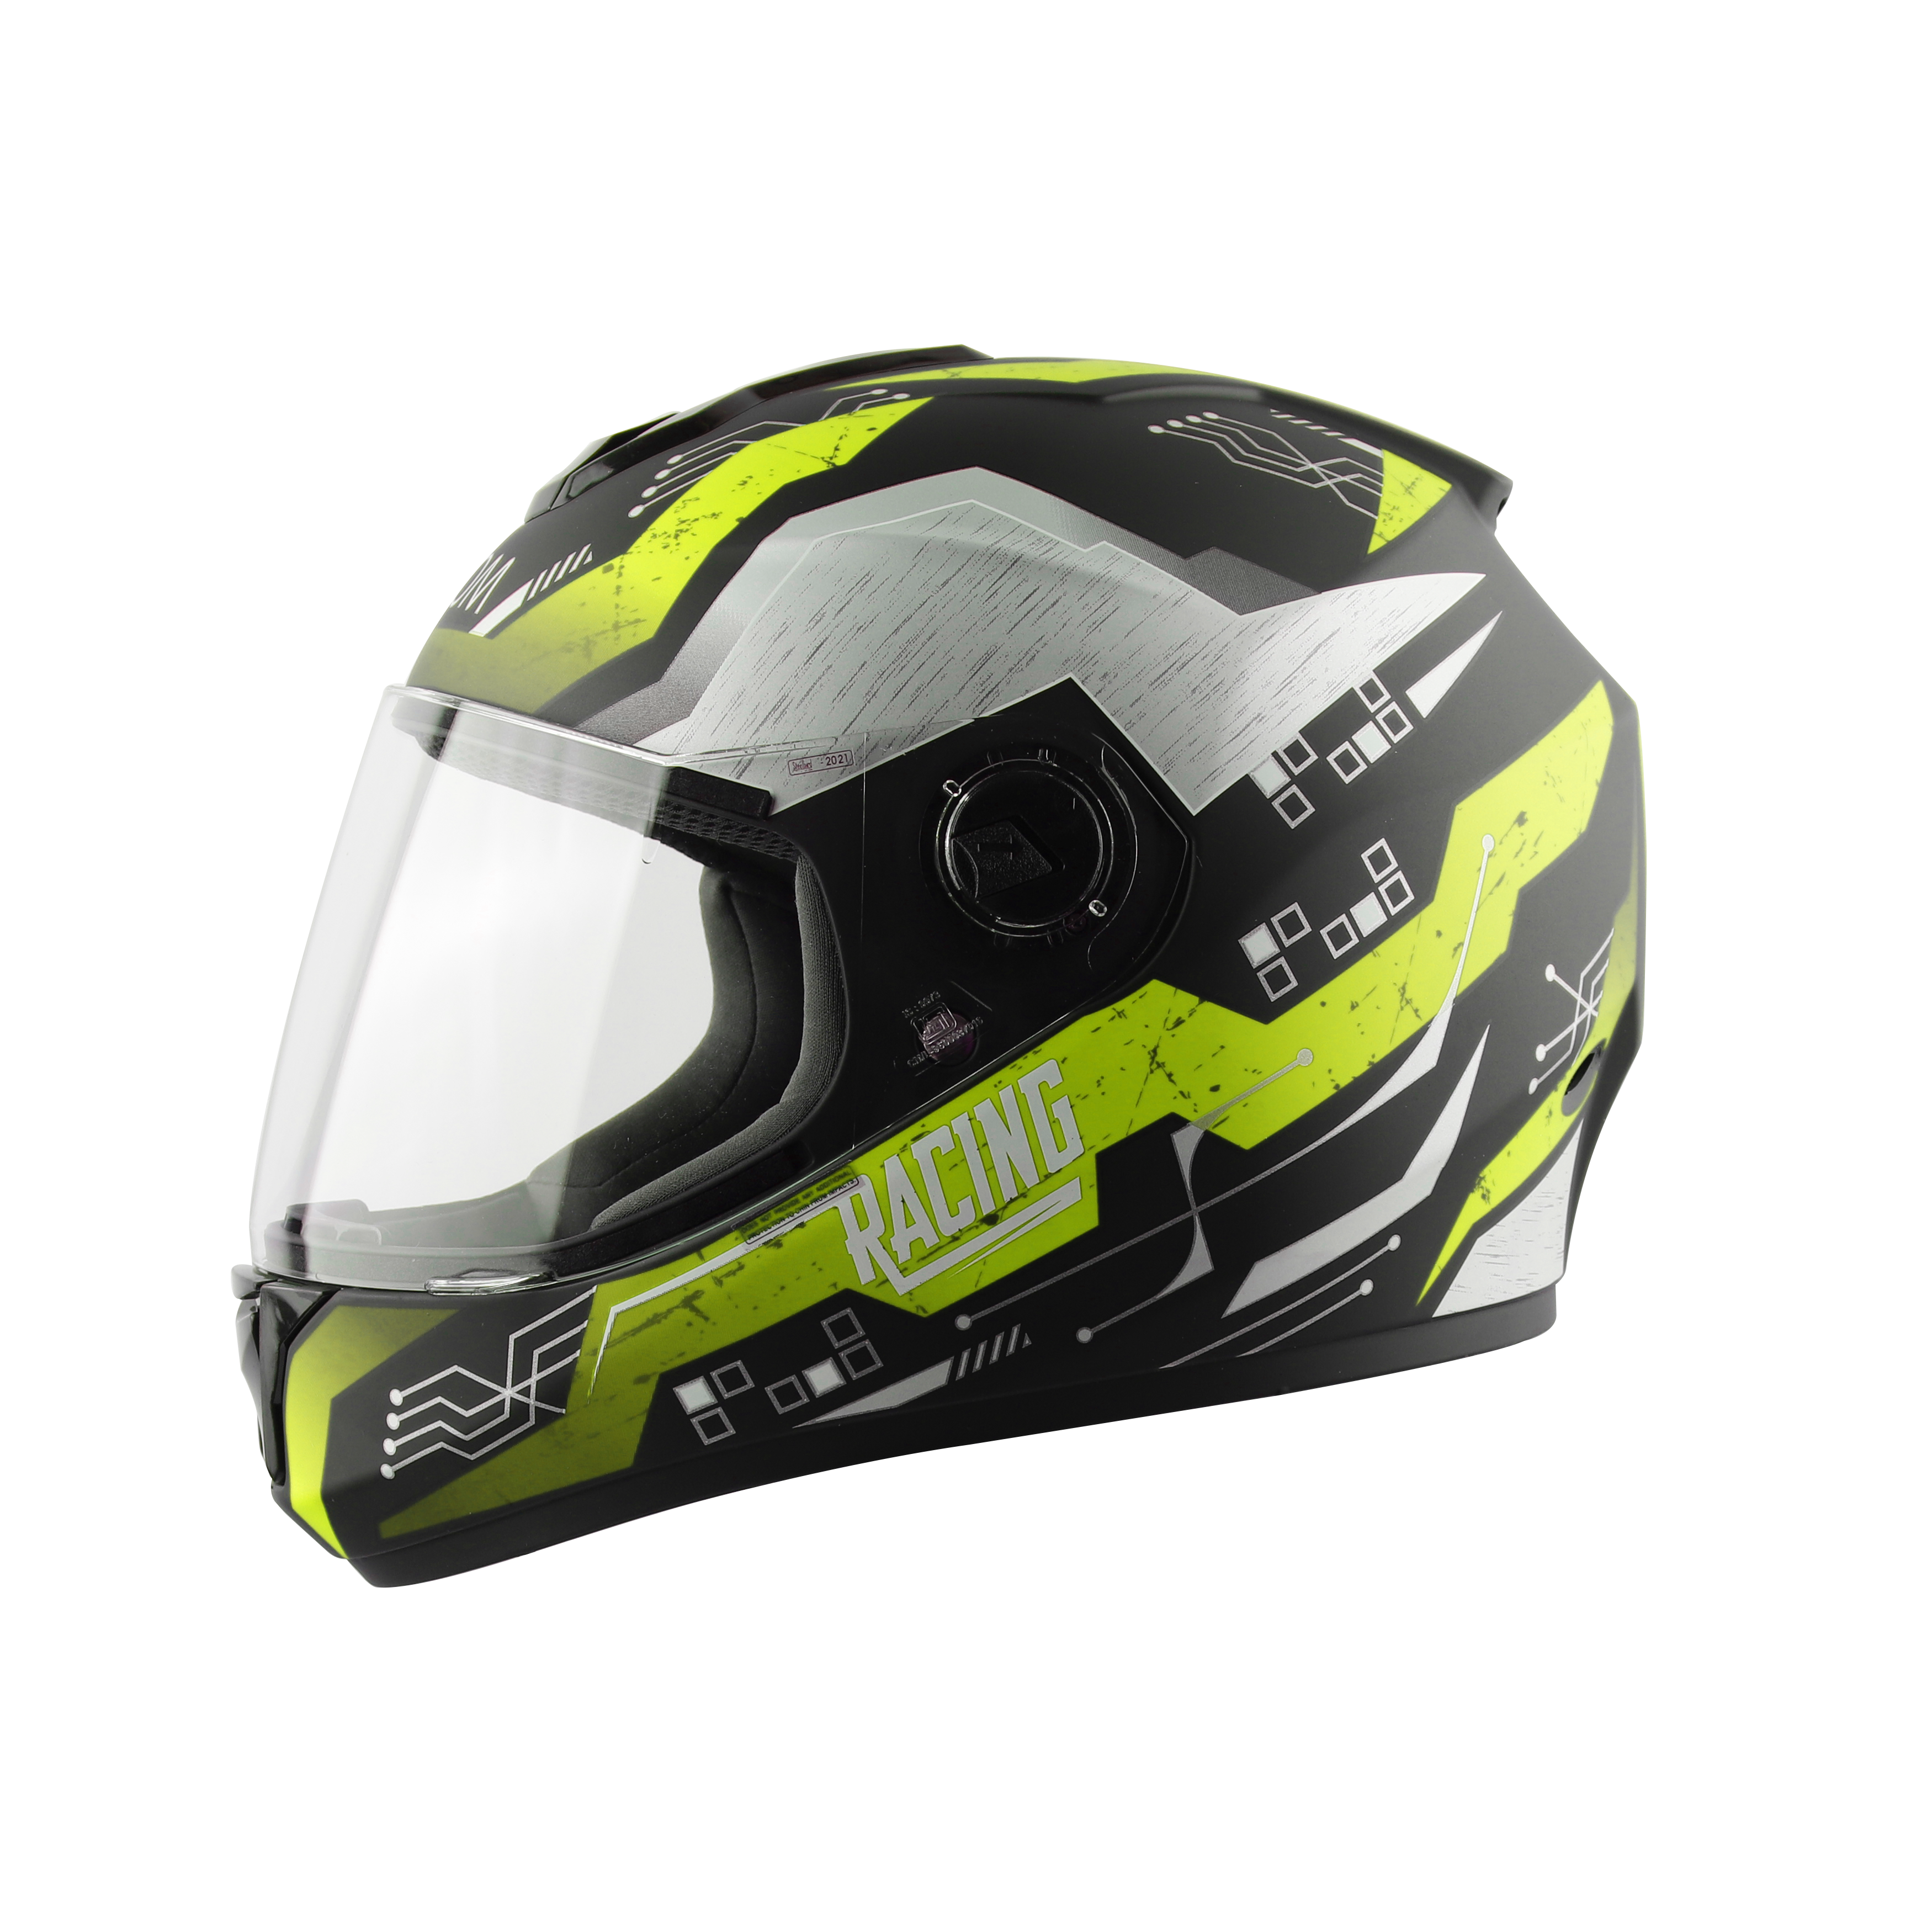 SBH-11 ZOOM RACING GLOSSY BLACK WITH FLUO YELLOW